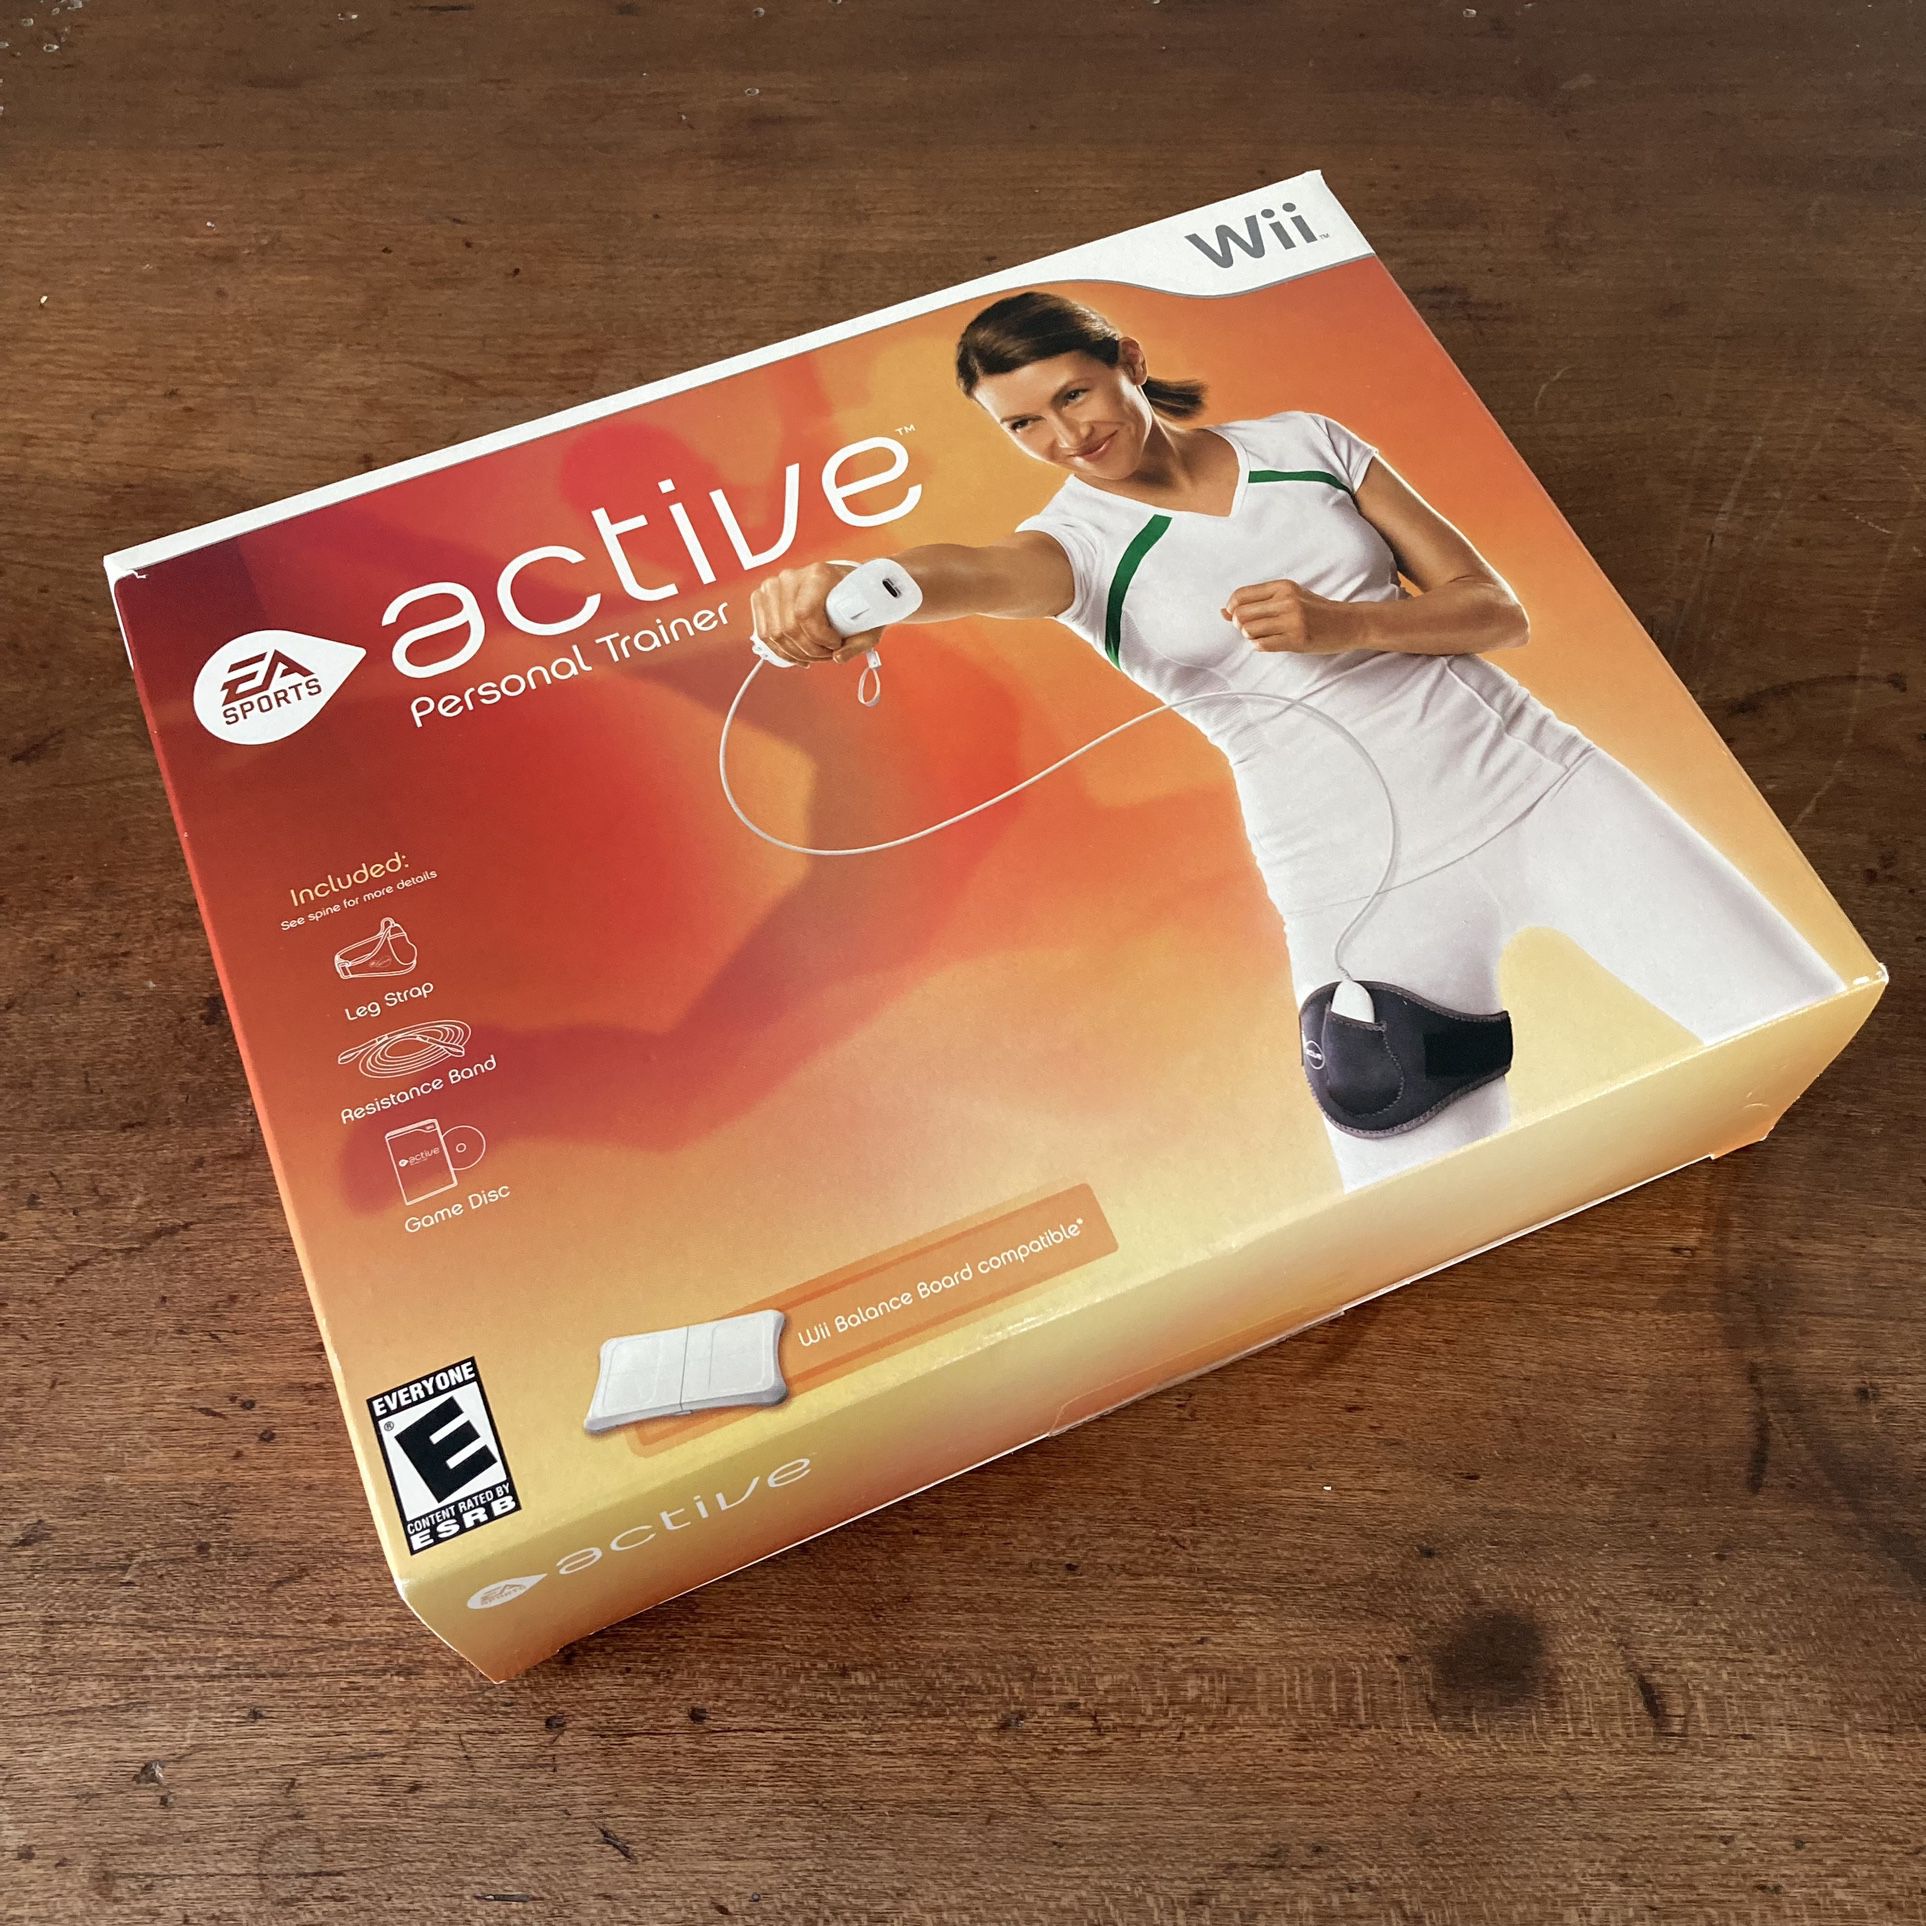 Nintendo Wii - EA Sports Active (Game + Resistance Band + Leg Strap) ```NEW  ```